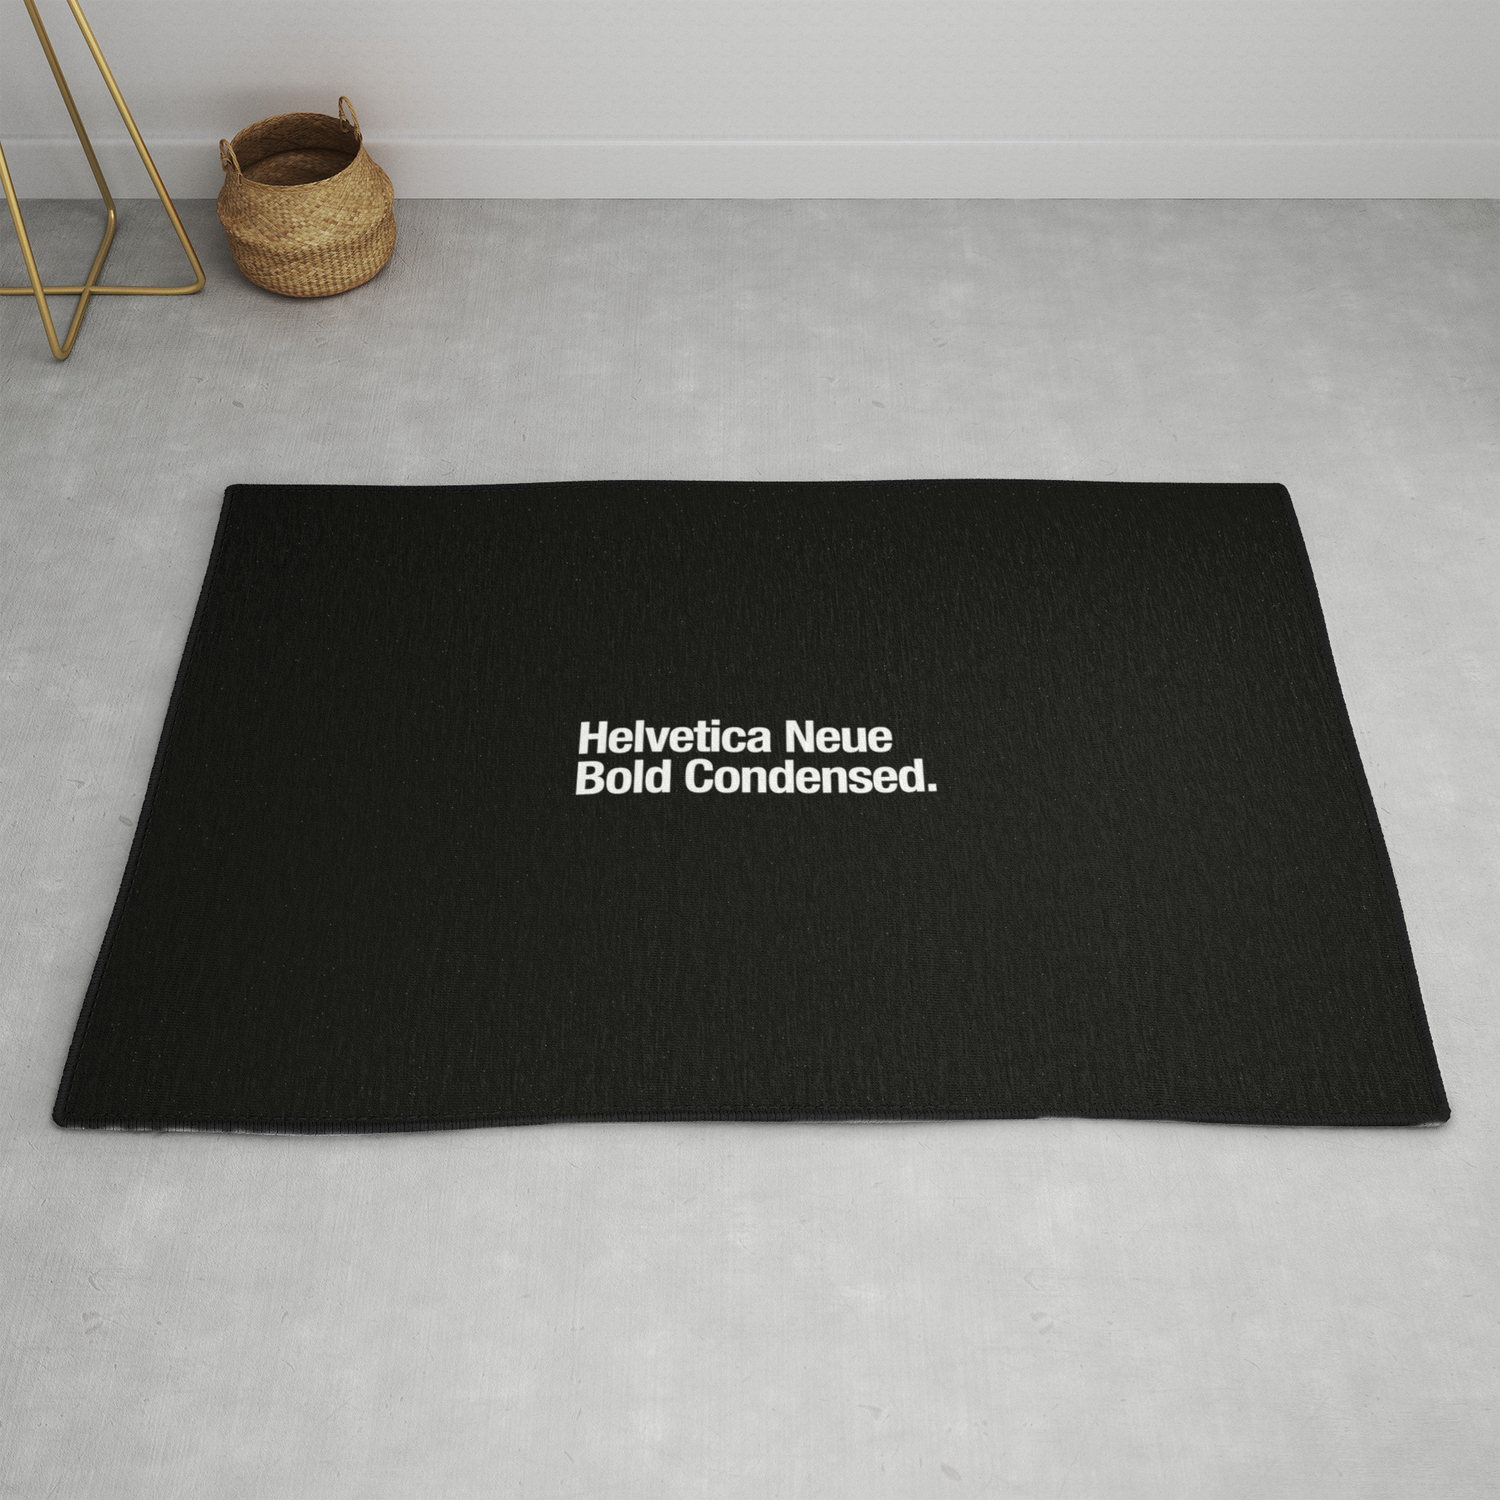 Helvetica Neue Bold Condensed Rug By Iing Society6